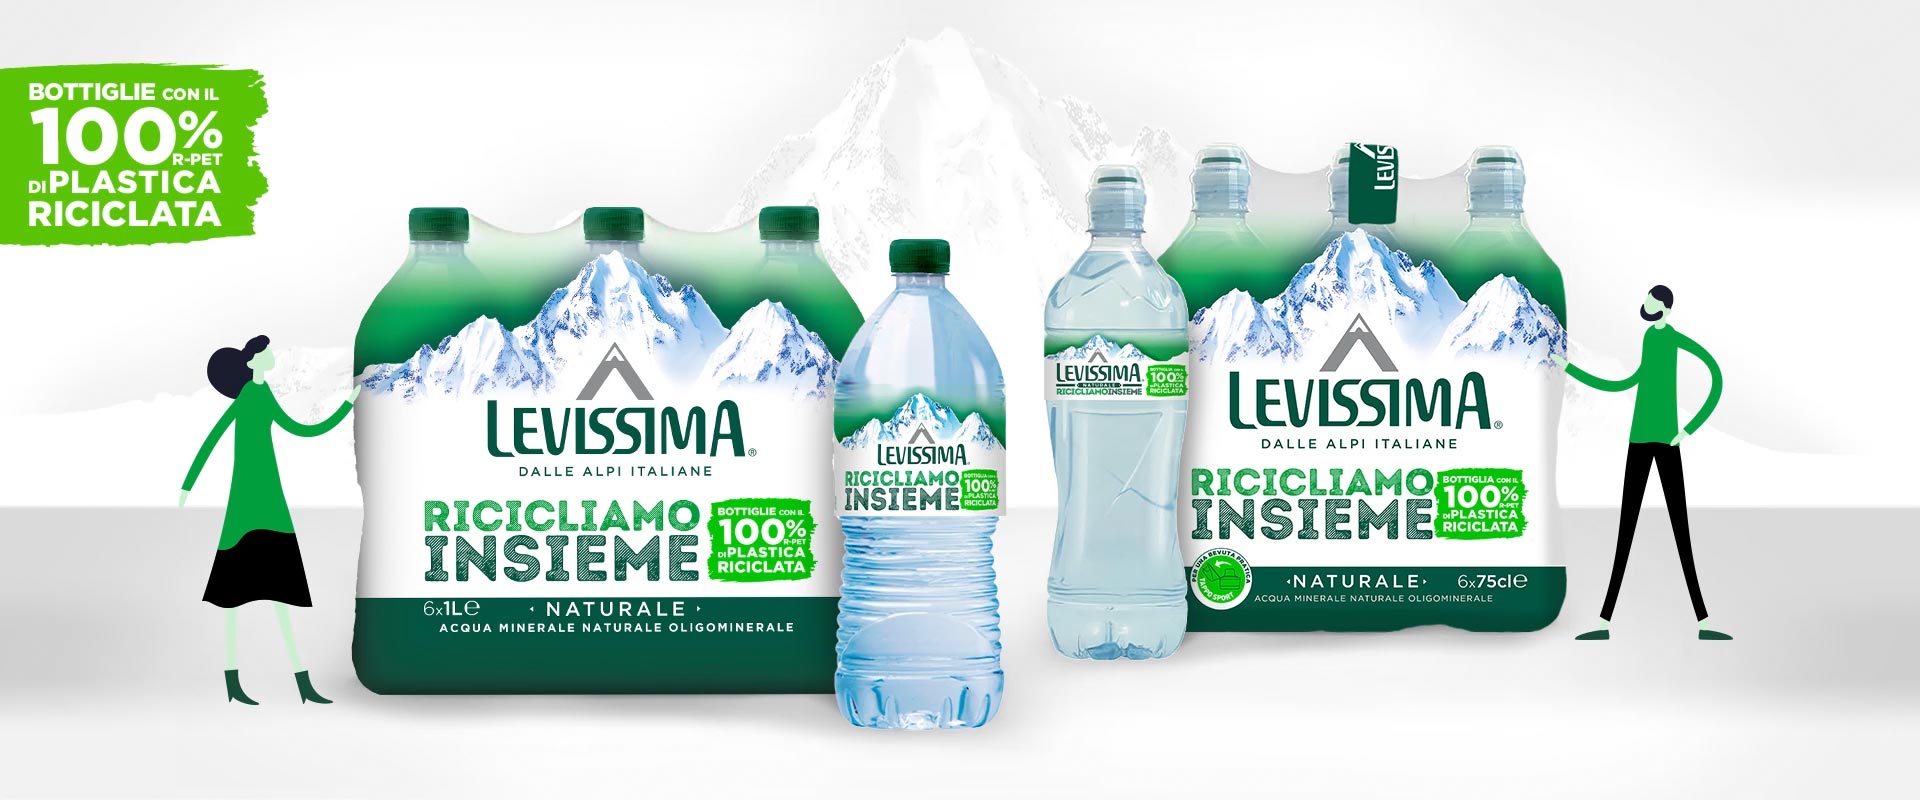 Levissima’s new bottles with 100% recycled plastic